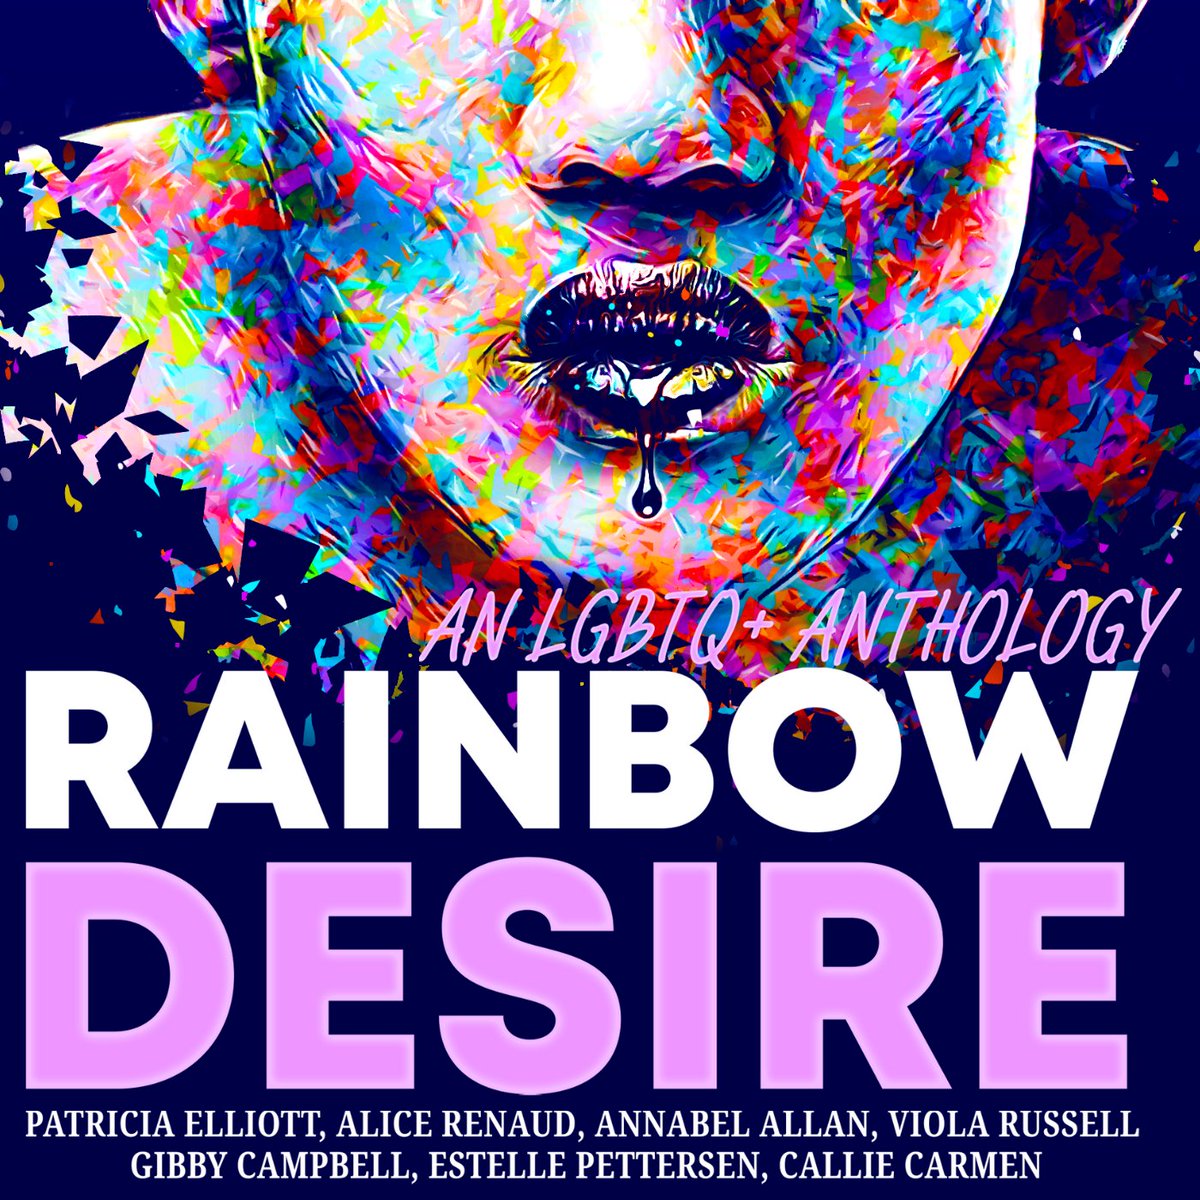 Book amzn.to/3ATp0jl Rainbow Desire is a celebration of life and love in its kaleidoscope of exotic rainbow colors. Includes James by Callie #romance #romancenovels #lgbtqcommunity #lgbtqia #lgbtqpride #Tuesday #gay #gayromance #MM #mmromance #loveislove #KindleUnlimited